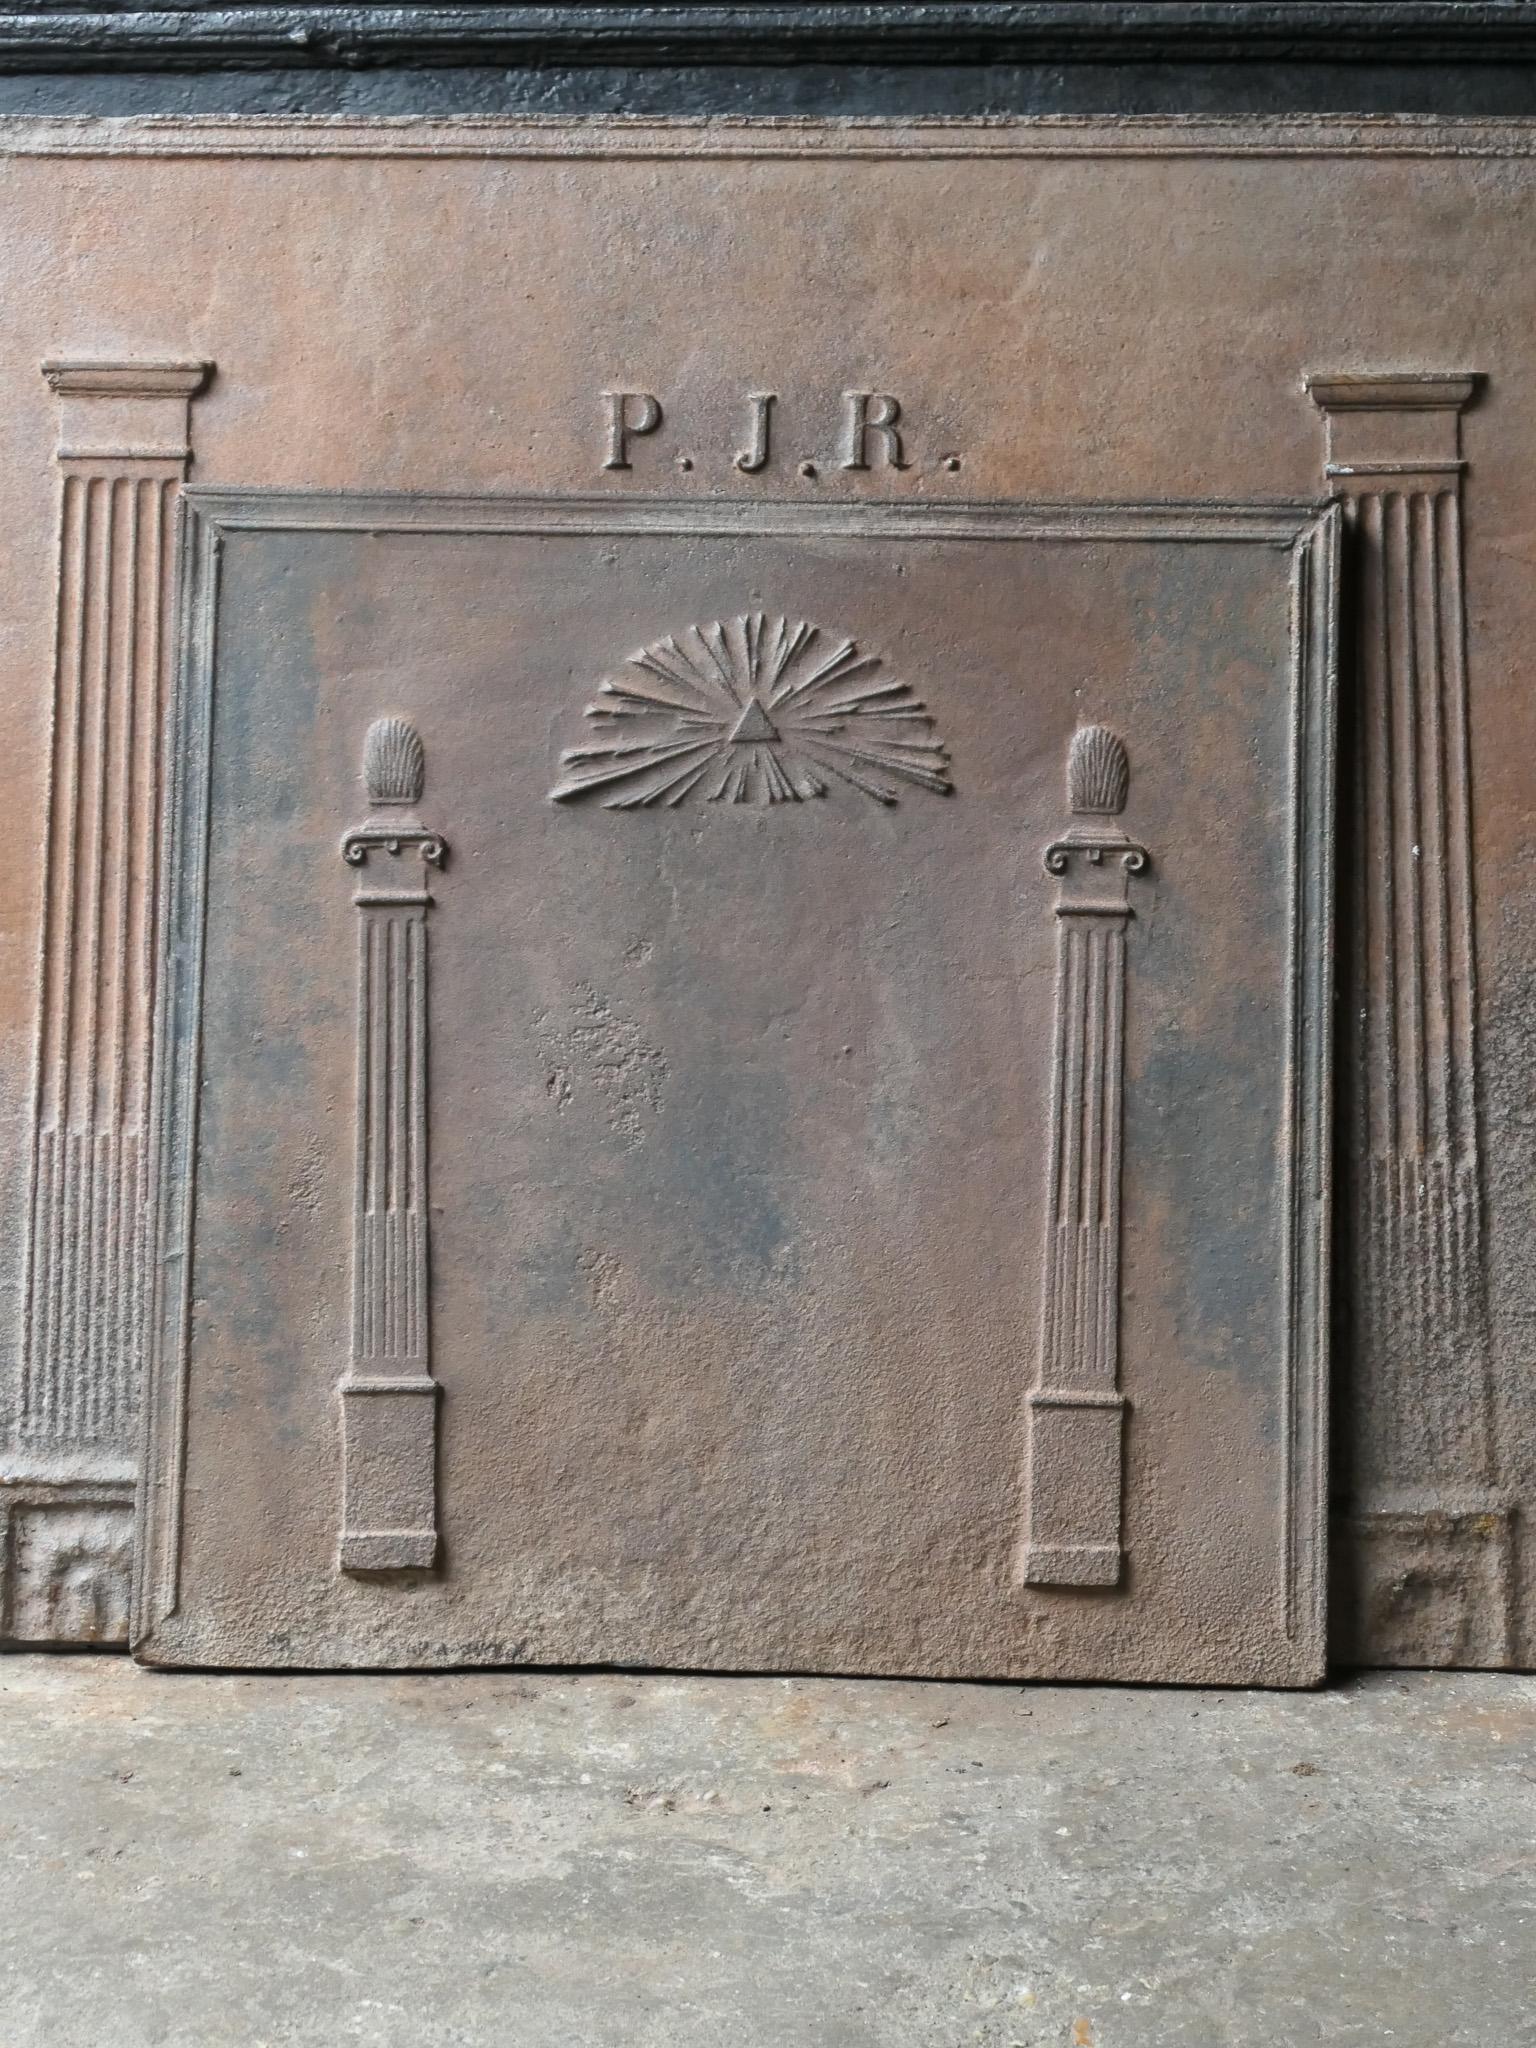 19th century French neoclassical fireback with two pillars of freedom and the masonic eye of providence symbol. The pillars symbolize the value liberty, one of the three values of the French revolution. 

The fireback is made of cast iron and has a